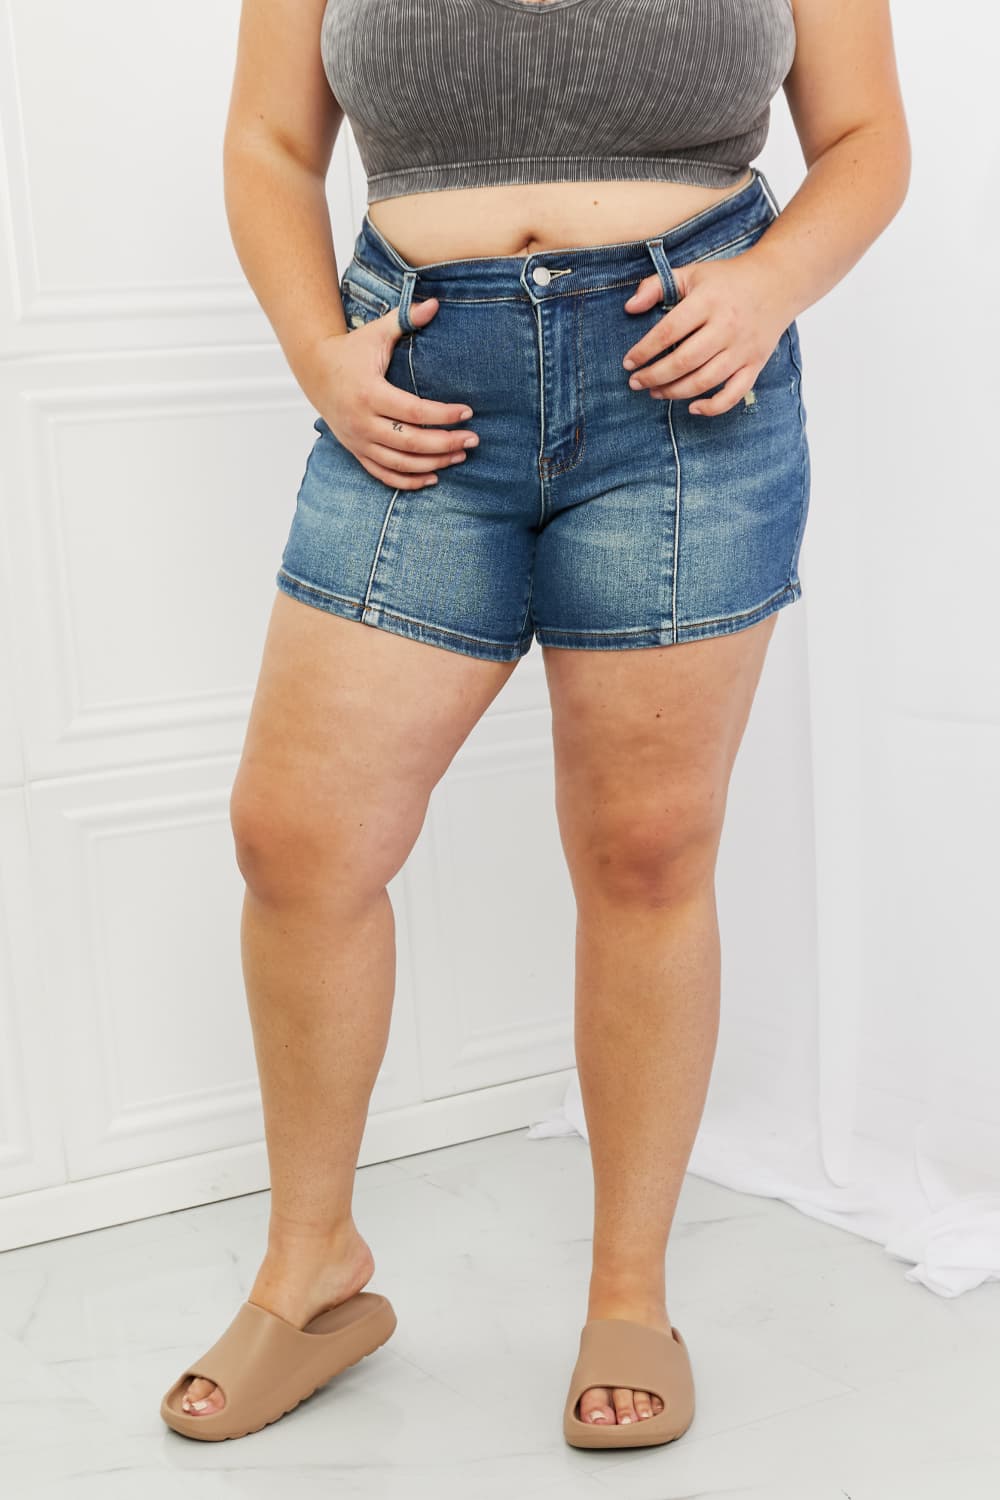 Plus Size, Judy Blue High Waist Seaming Detailed Shorts Style 150211